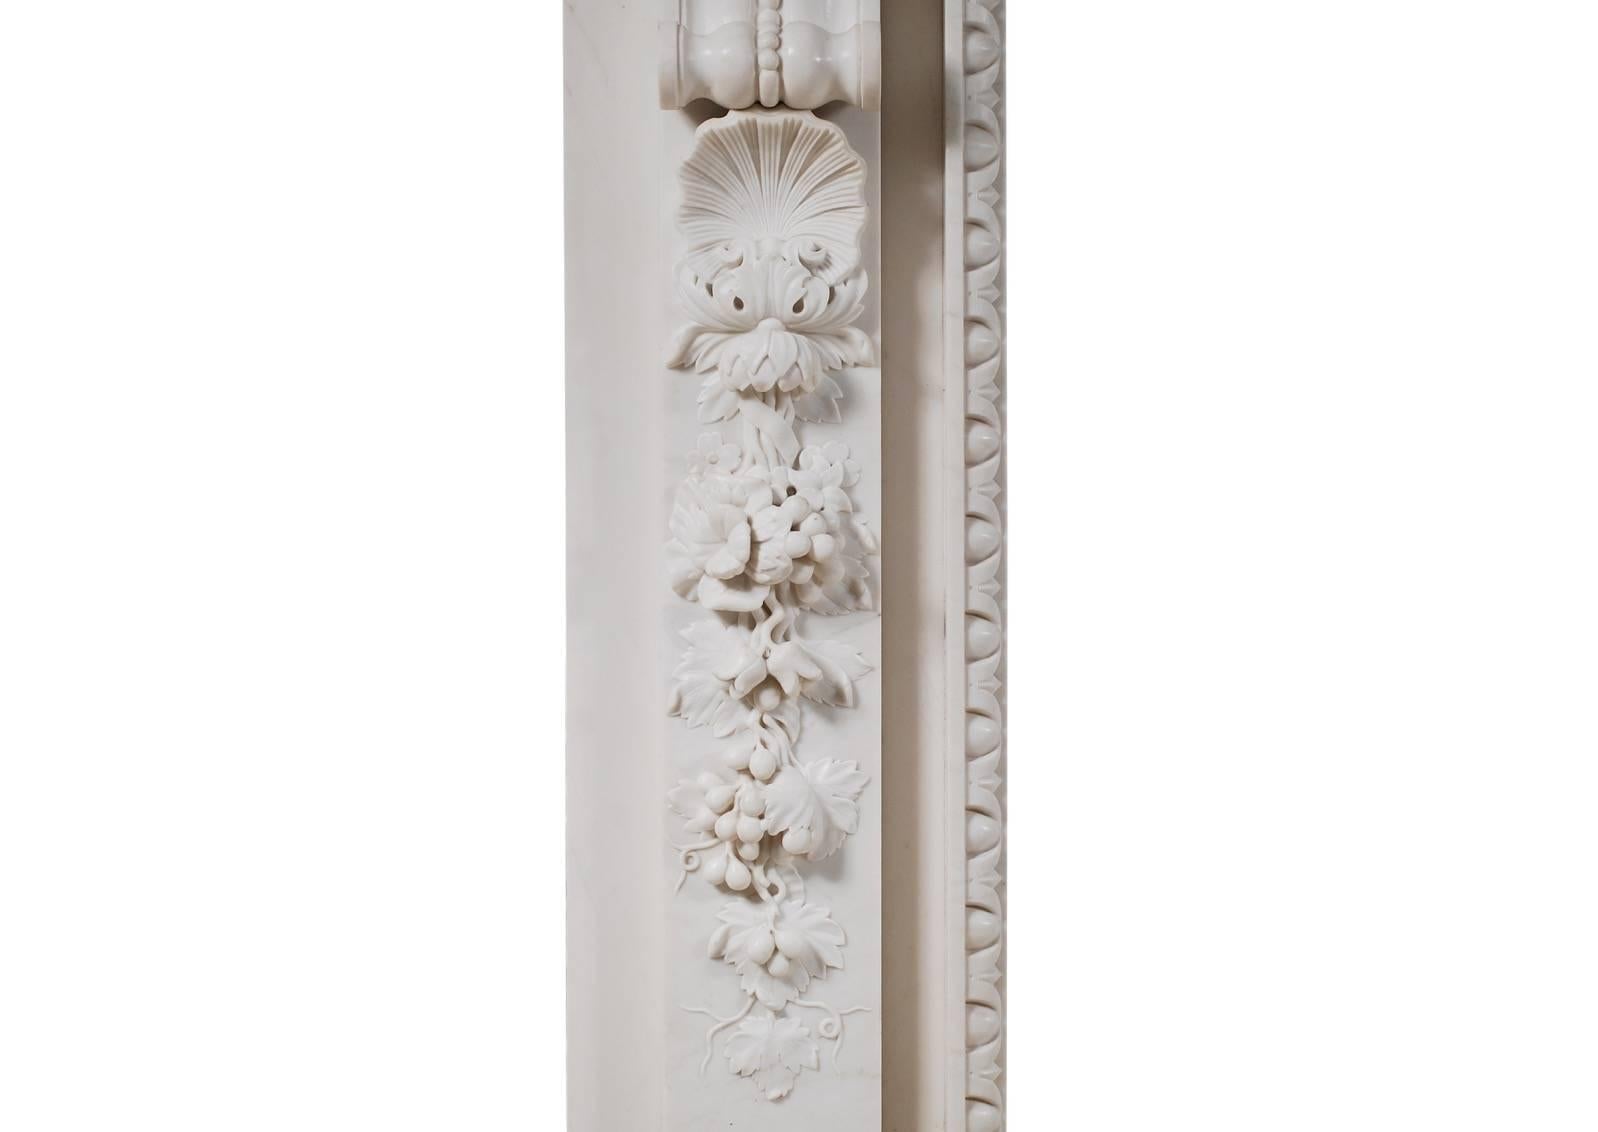 A mid-Georgian style fireplace in white marble, the carved tablet illustrating Aesops fable. The Dog and the shadow. The jambs with deeply carved shell and drops of vine leaves, grapes and foliage with tied ribbons, surmounted by scrolled brackets.